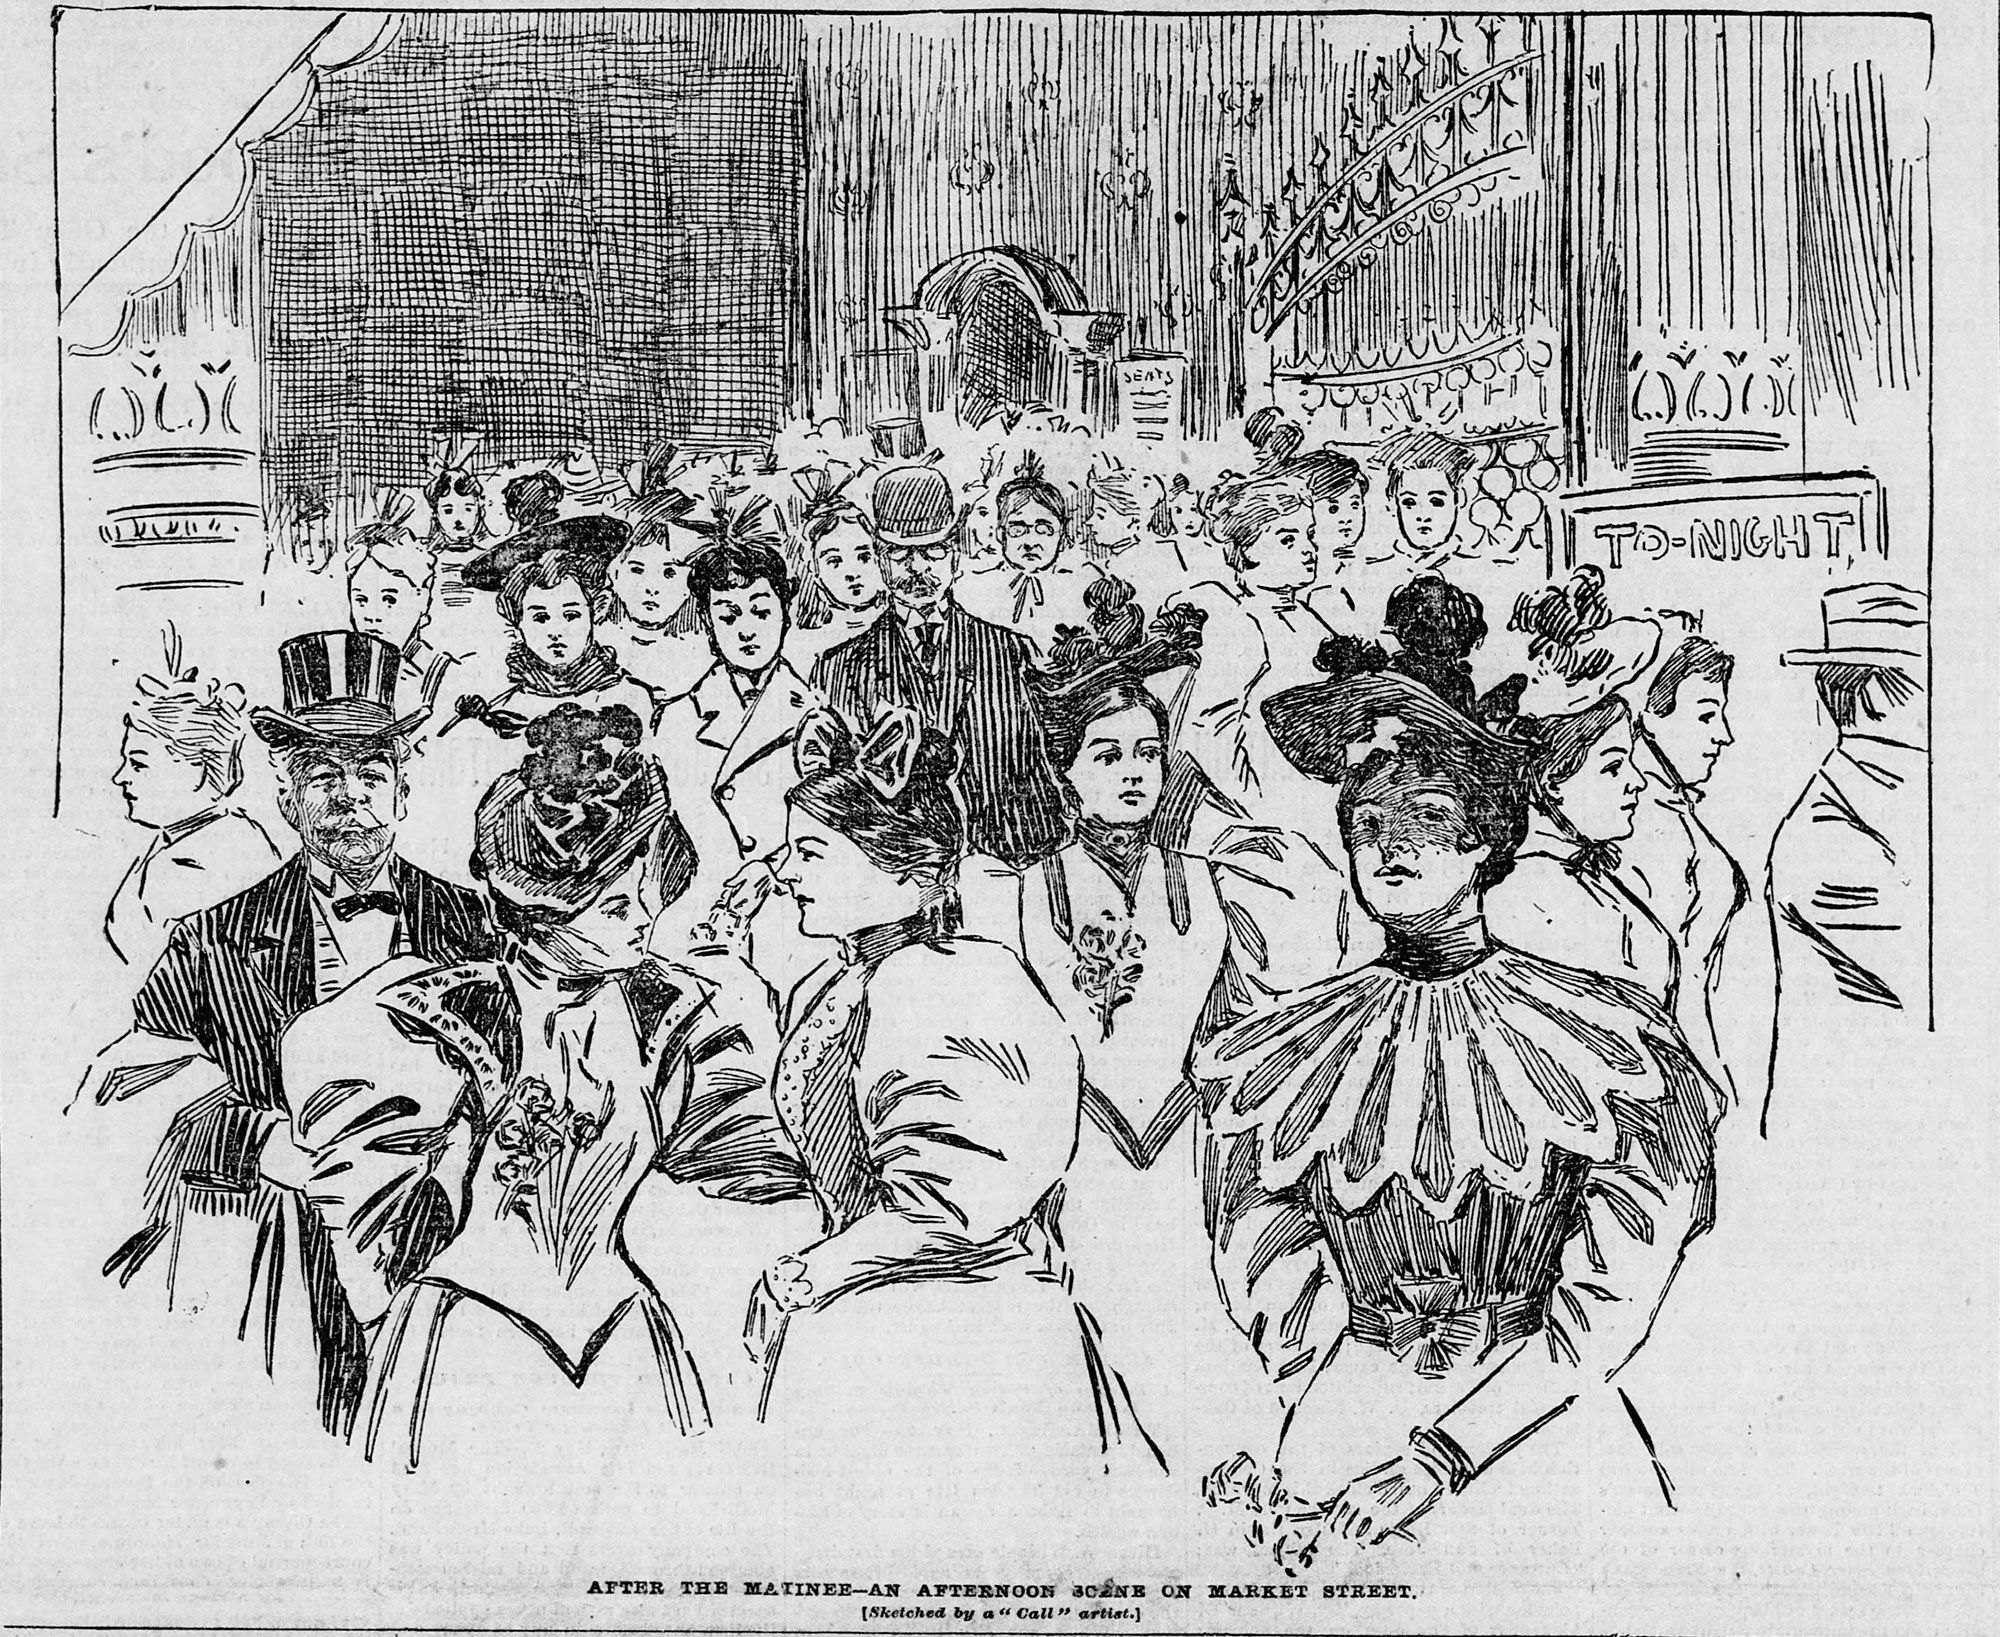 Illustration of crowd from 1895 newspaper